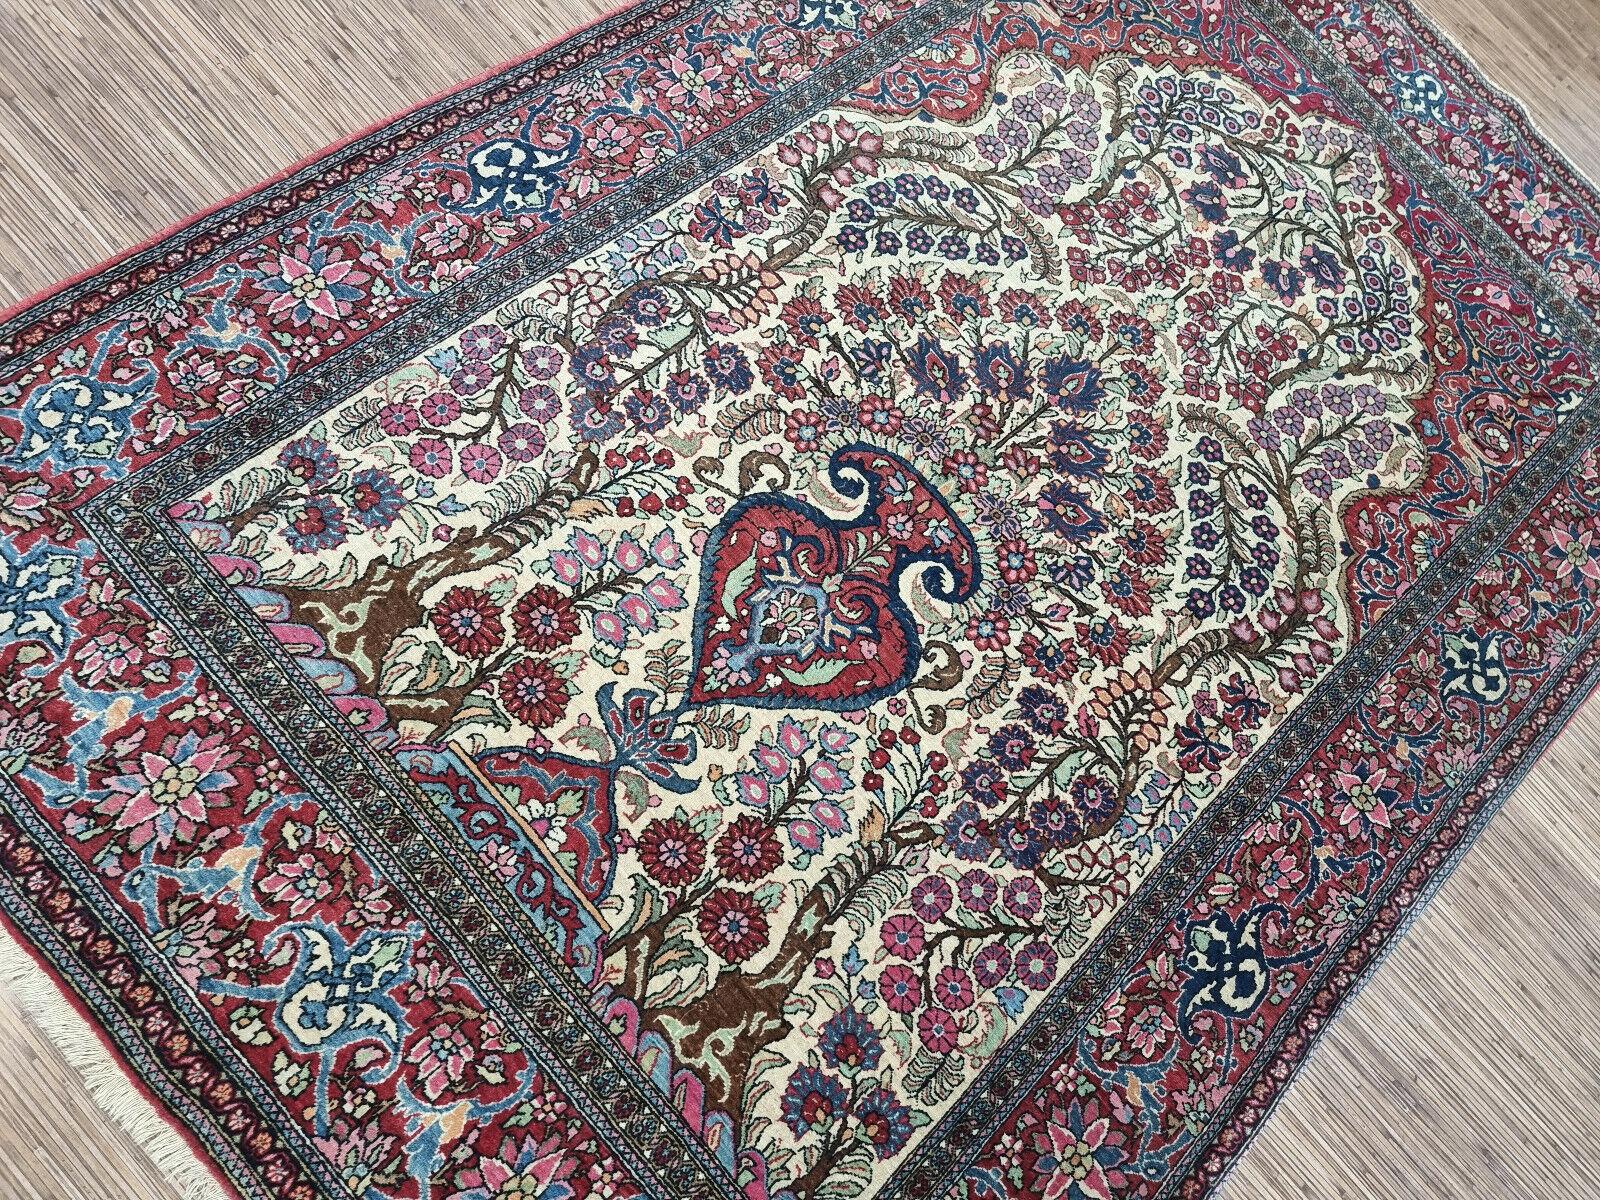 Handmade Antique Persian Style Isfahan Prayer Rug 4.6' x 6.8', 1900s - 1D85 For Sale 5